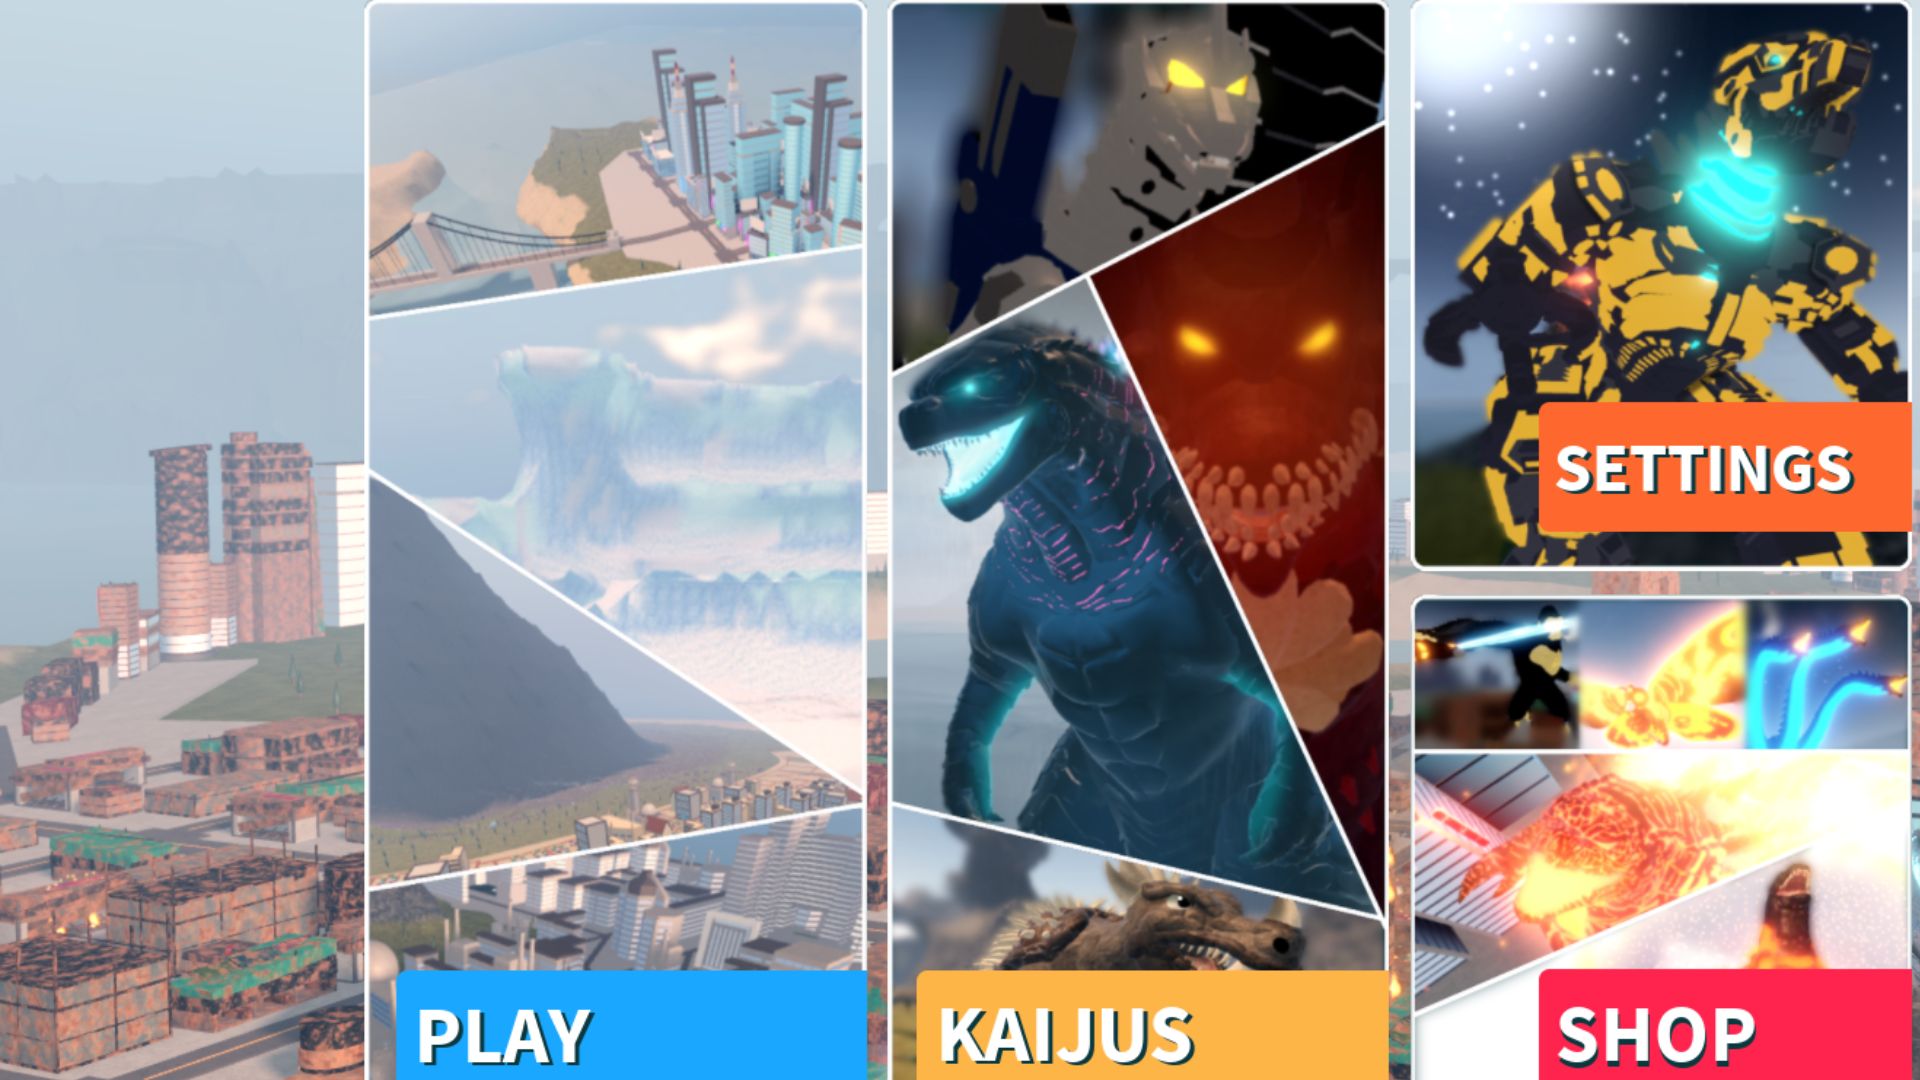 The menu from Roblox game Kaiju Universe. There are four pictures, one of a landscape with the word 'play' at the bottom, a comic book-style mashup of Godzilla-looking Kaiju with the word 'kaijus' a the bottom, and a settings menu, all in front of a large virtual landscape.